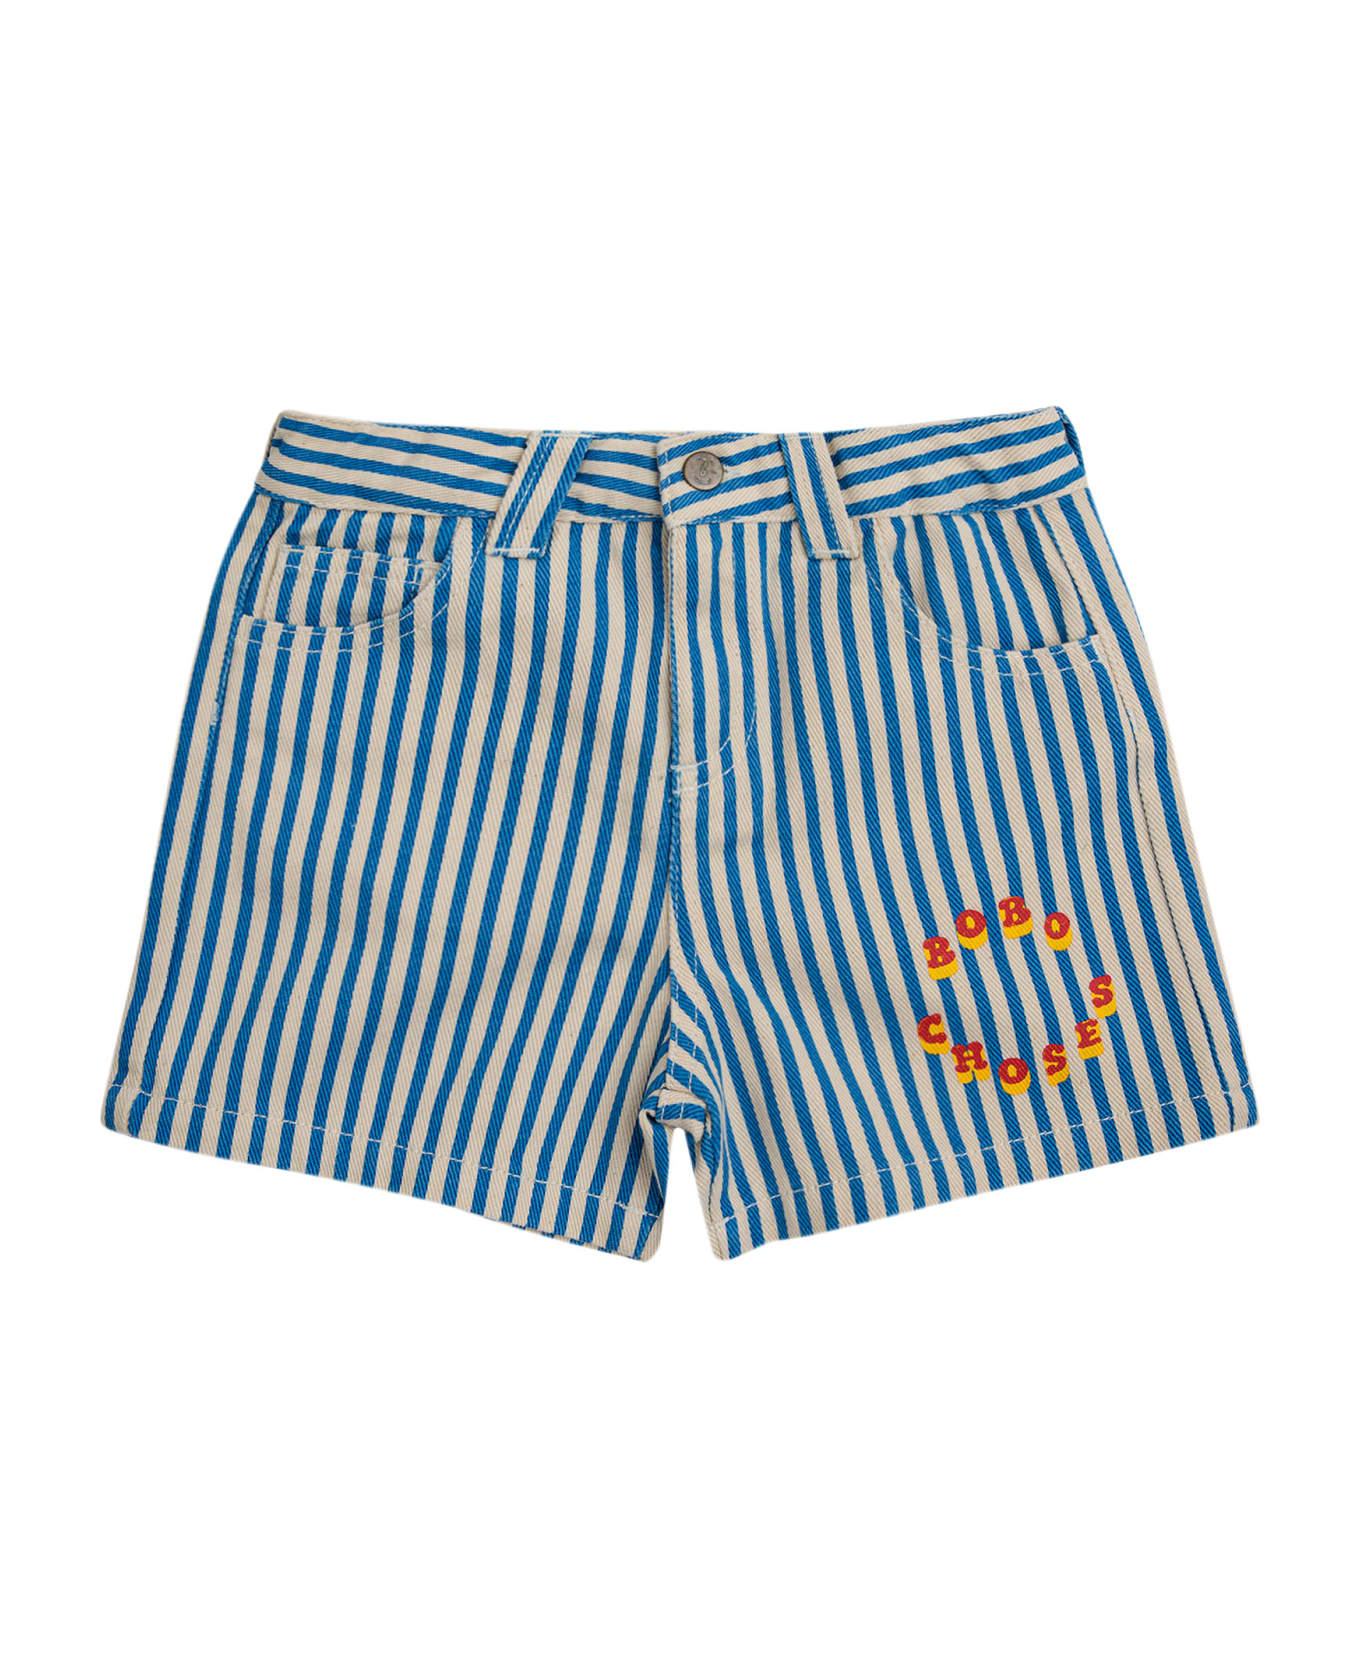 Bobo Choses Striped Shorts With Logo For Kids - Blue